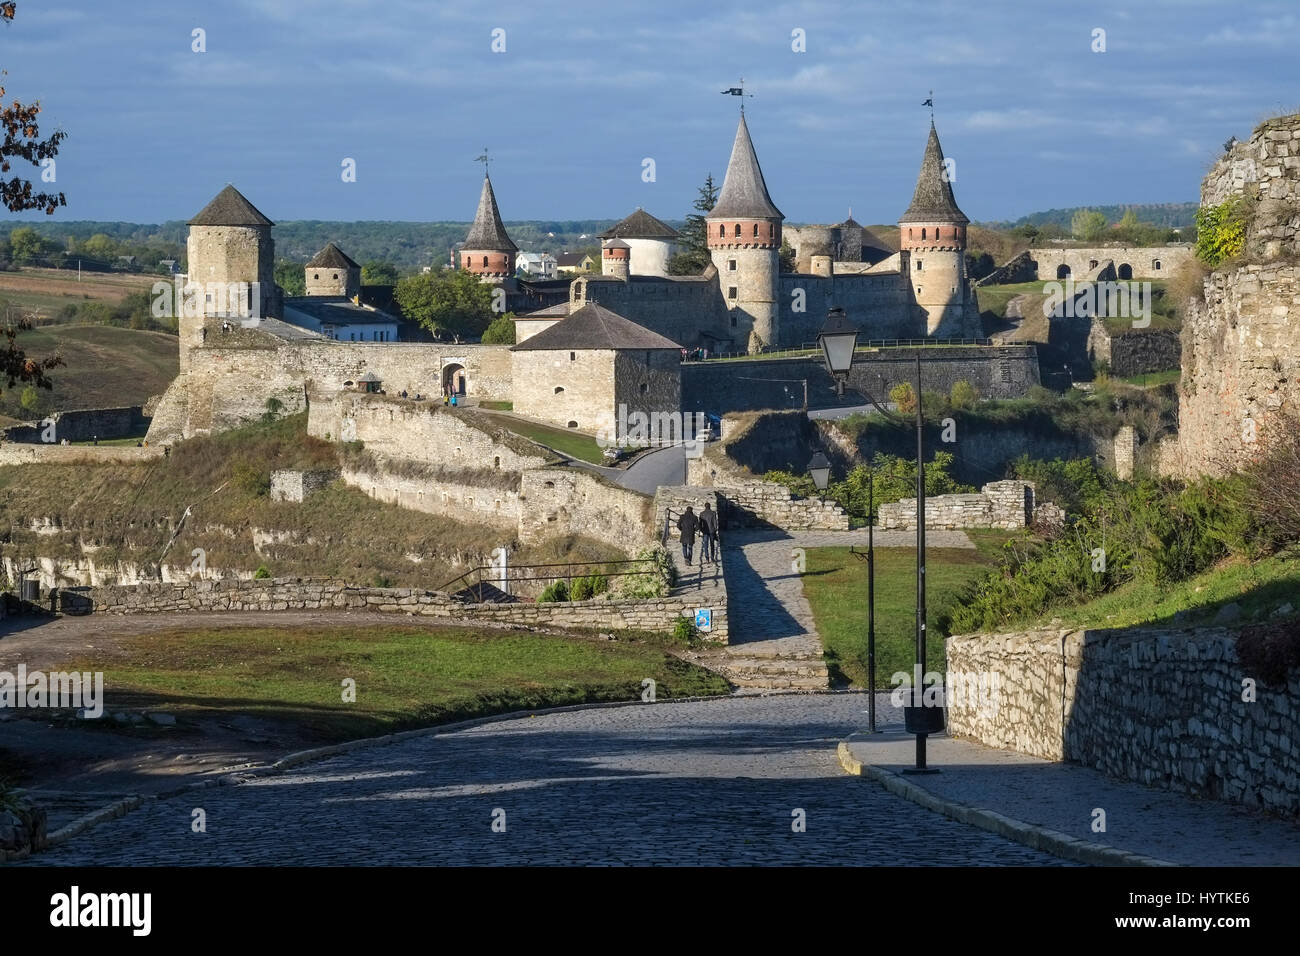 View of the Most Zamkowy and Castle of Kamianets-Podilskyi in Western Ukraine taken on a sunny autumn day. The cobbled street leads the eye across the Stock Photo